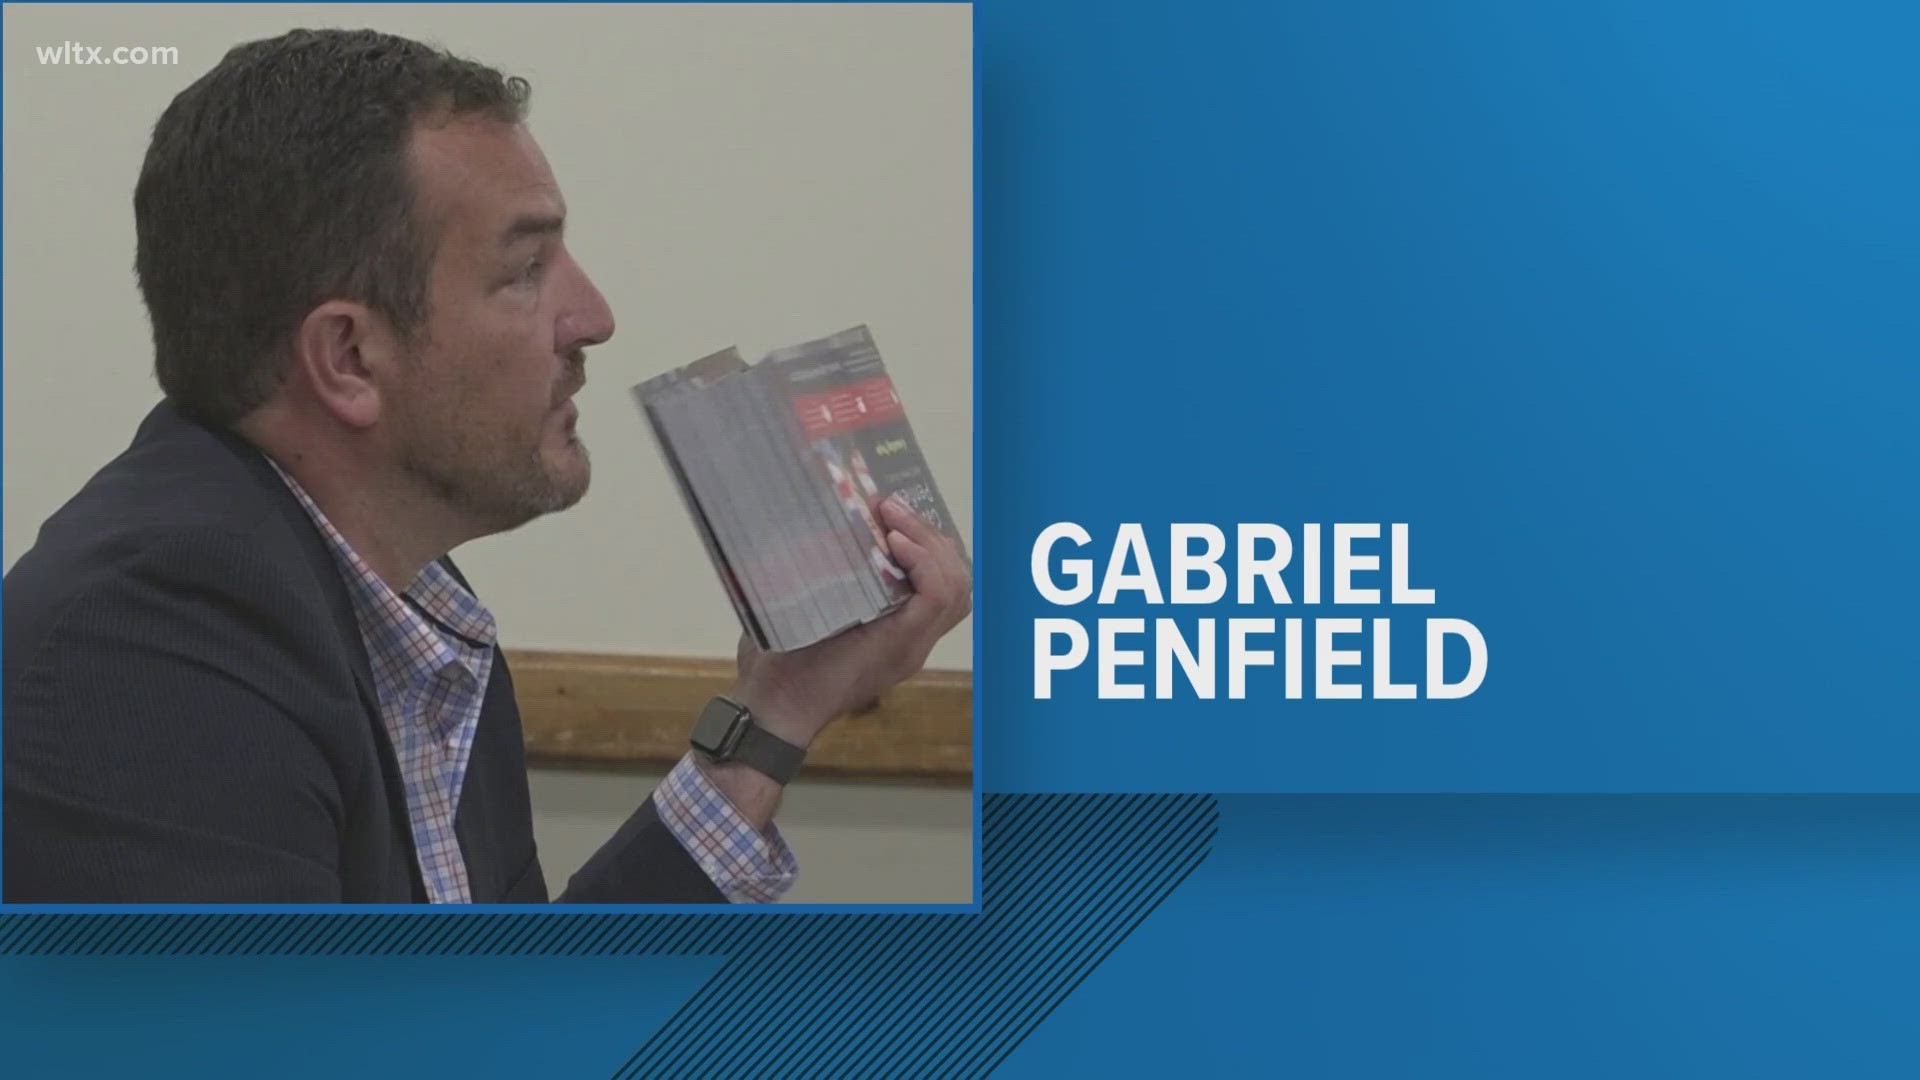 Gabriel Penfield is the town of Irmo's newest councilperson.